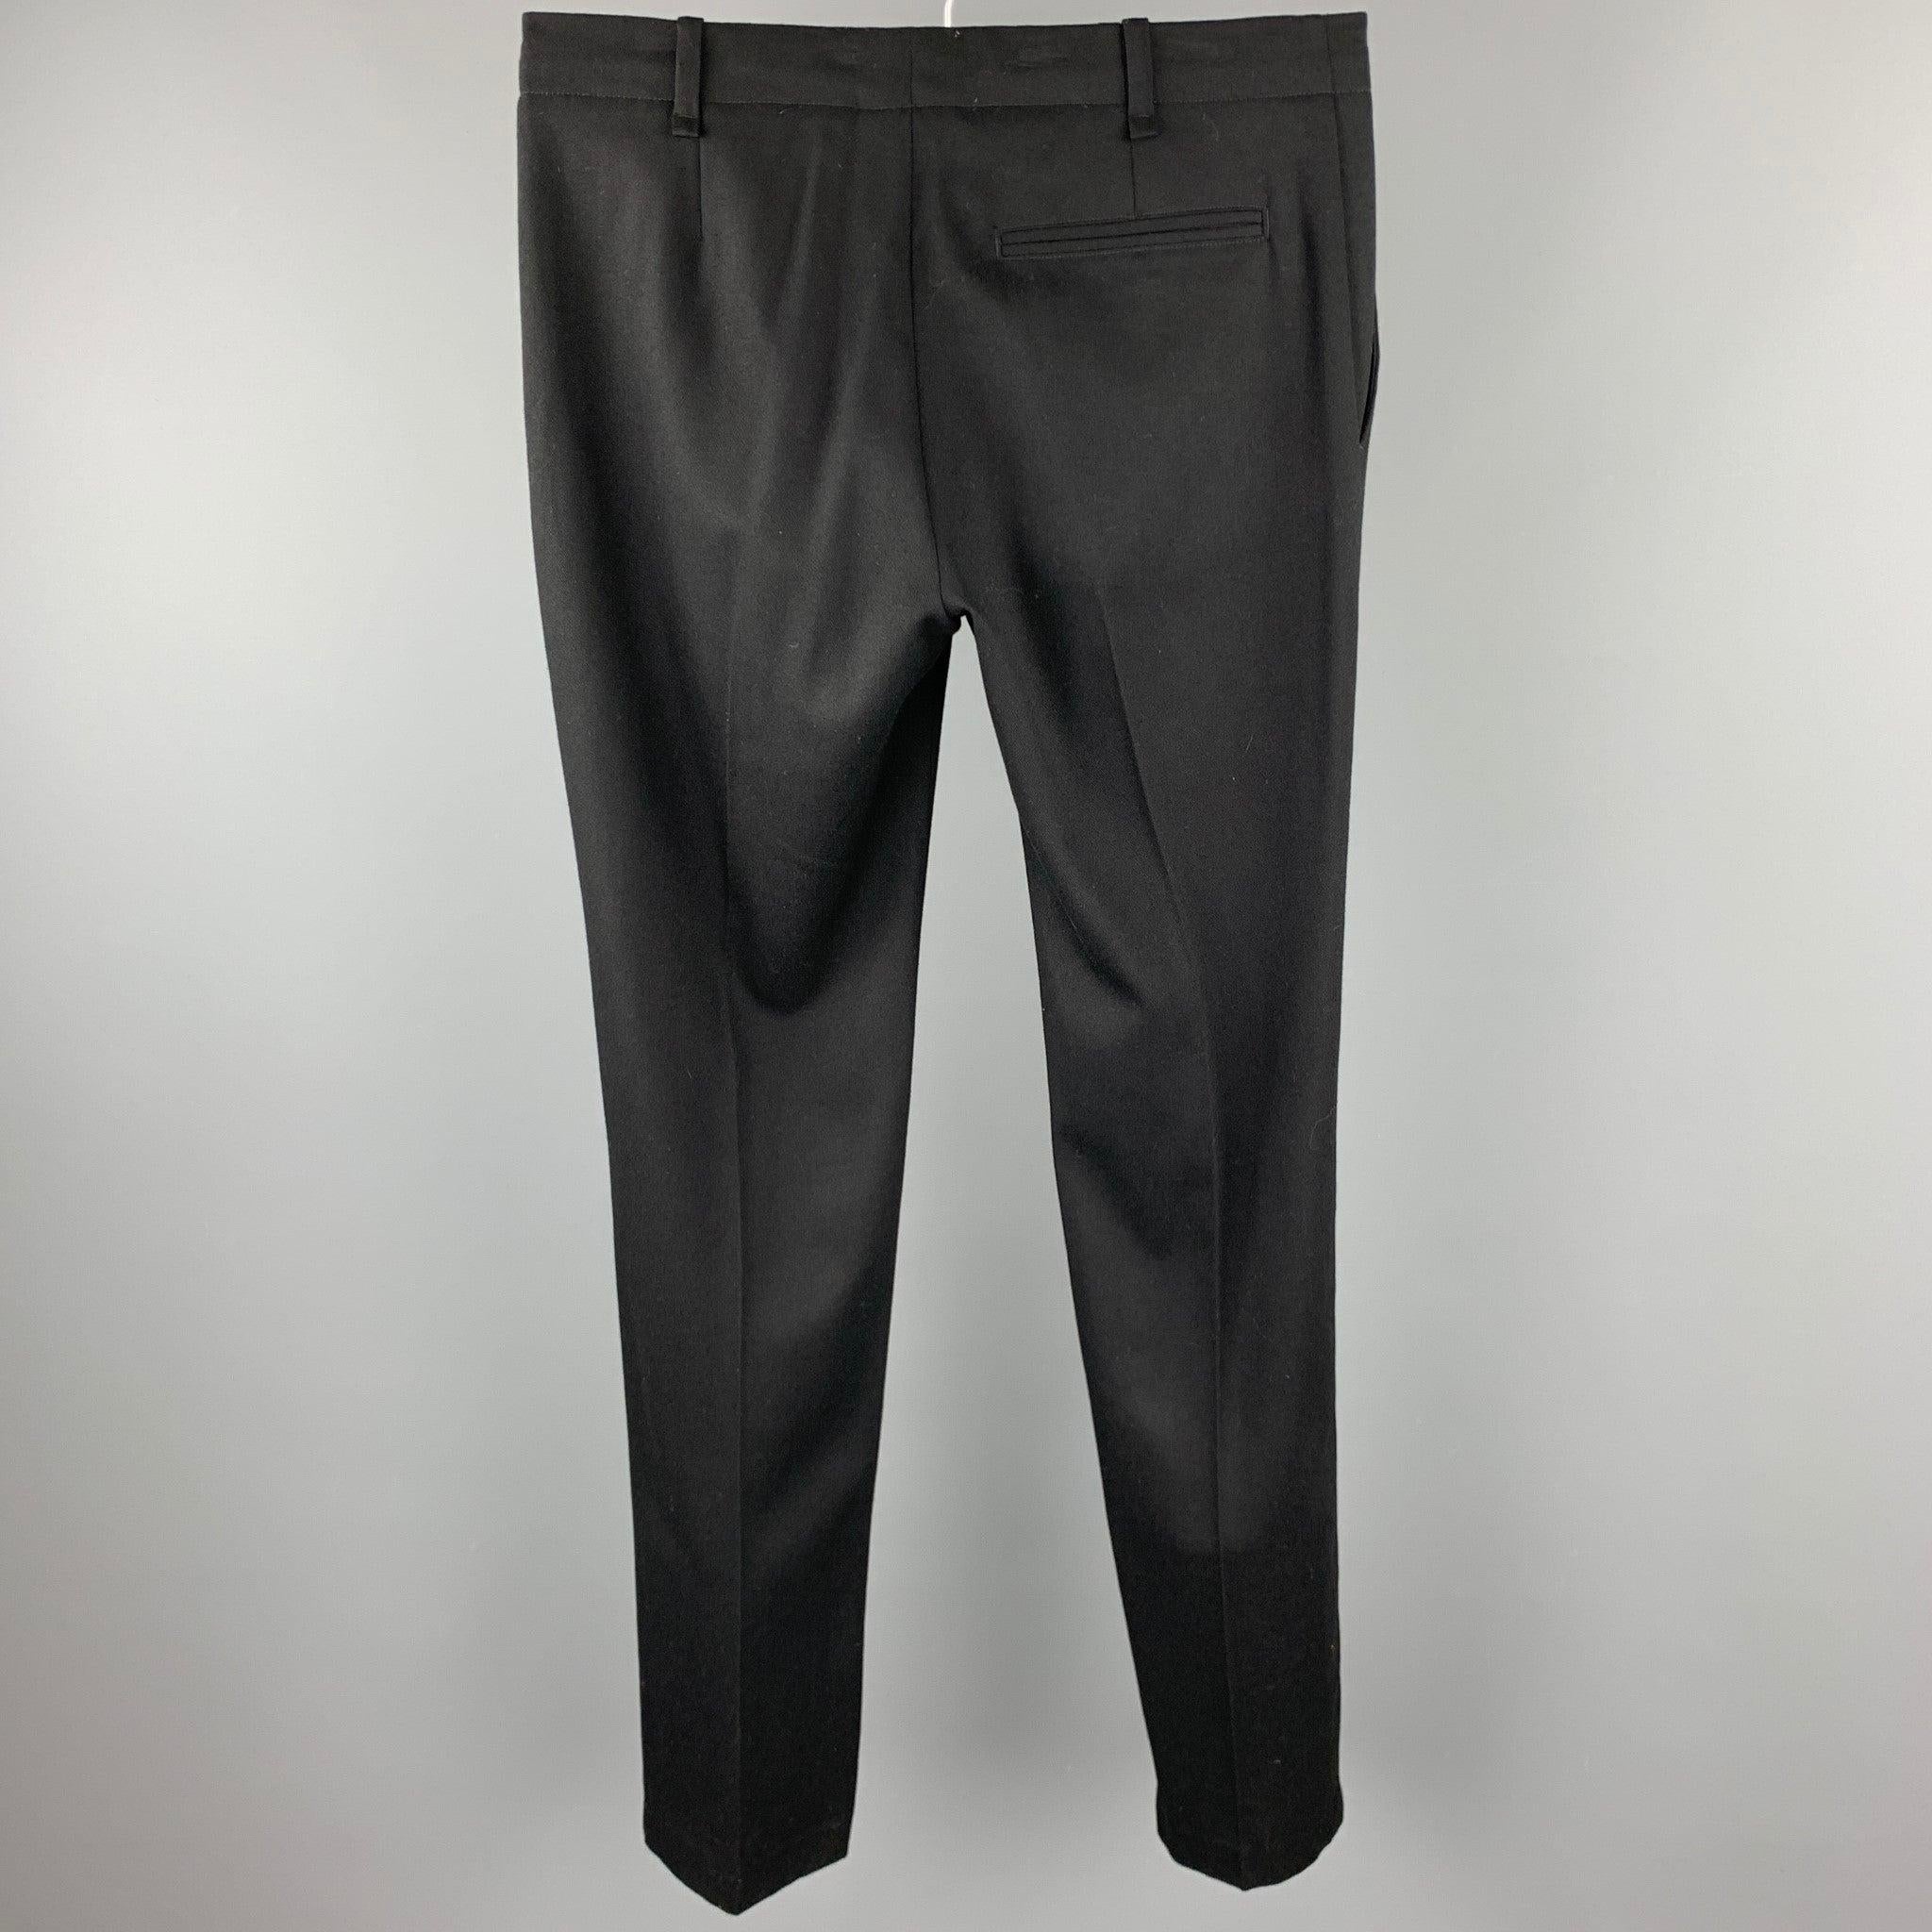 JOHN GALLIANO dress pants comes in a black wool featuring a flat front style and a zip fly closure. Made in Italy.Excellent
Pre-Owned Condition. 

Marked:   34/48 

Measurements: 
  Waist: 34 inches 
Rise: 8.5 inches 
Inseam: 35 inches 
  
  
